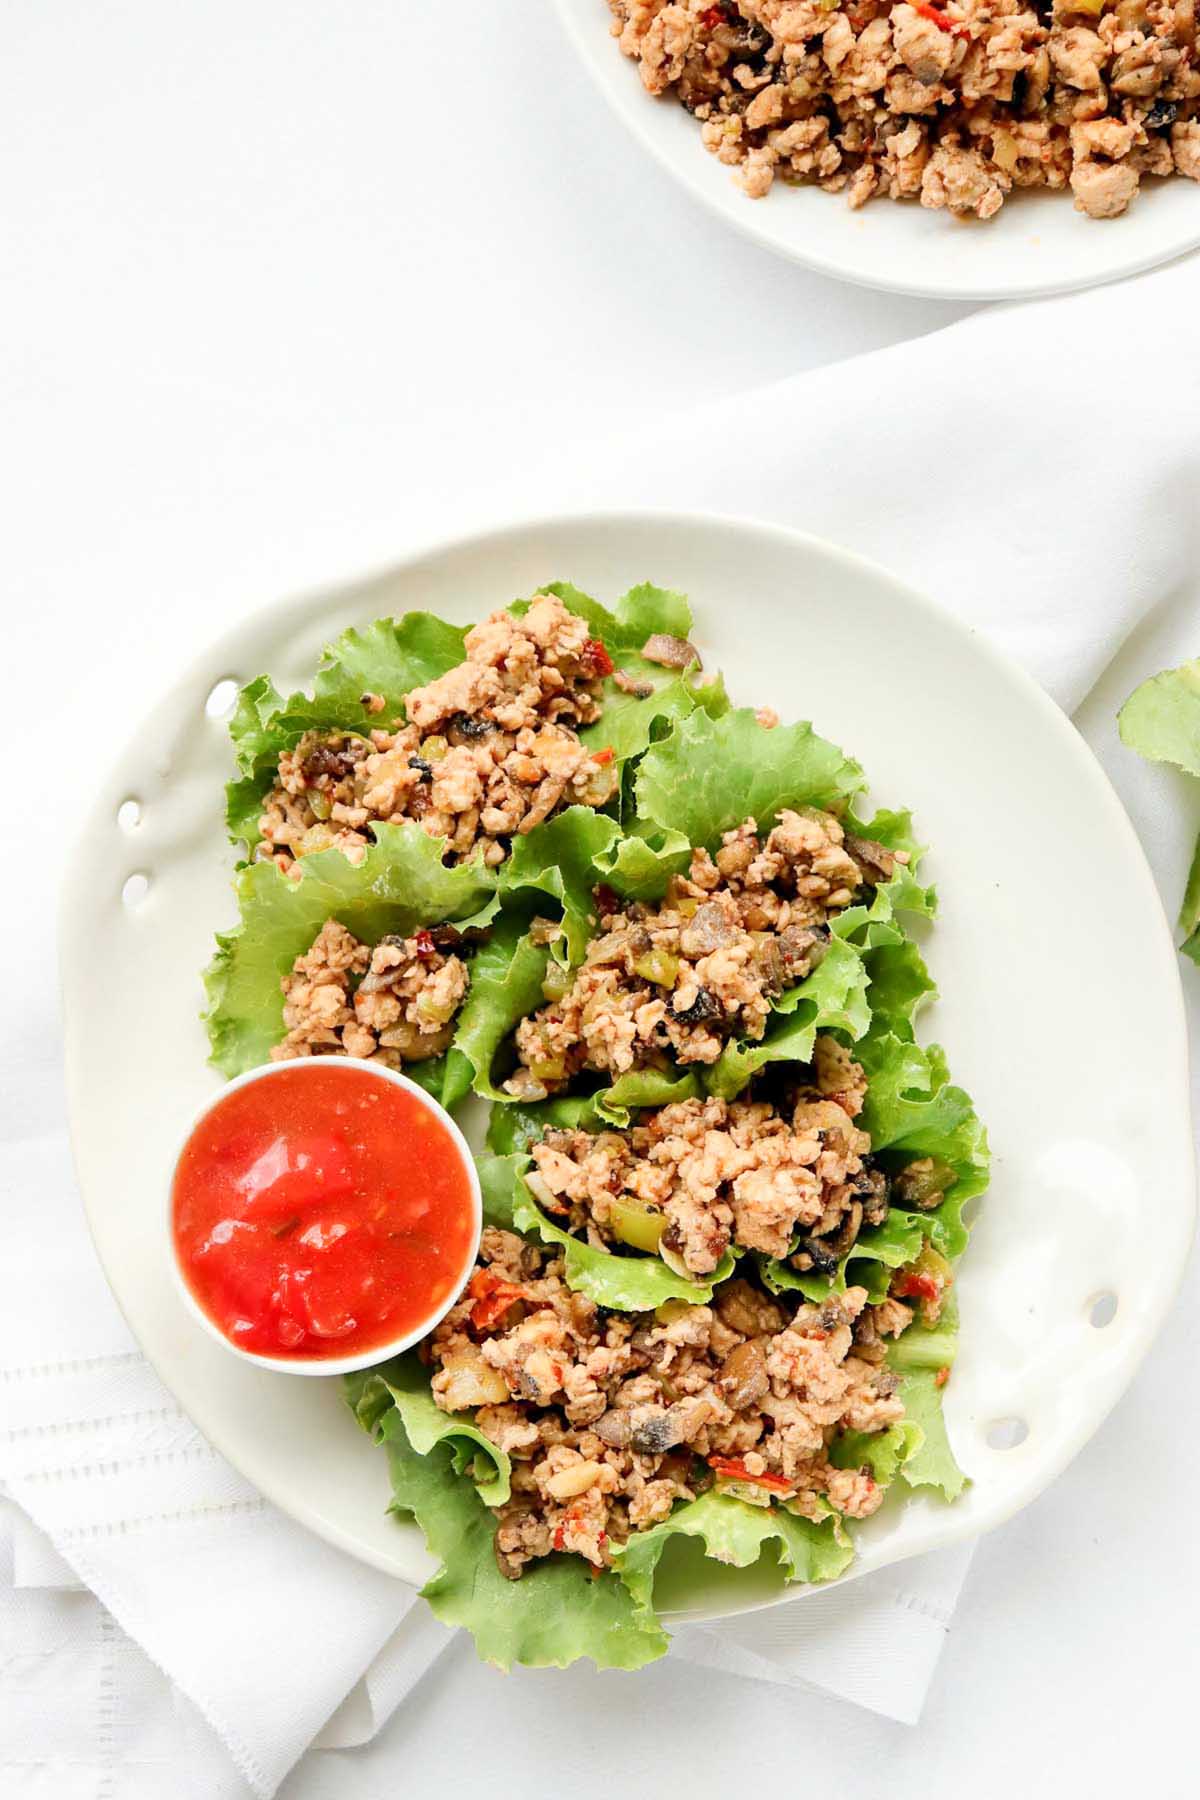 top view of lettuce wraps on a plate with sauce.